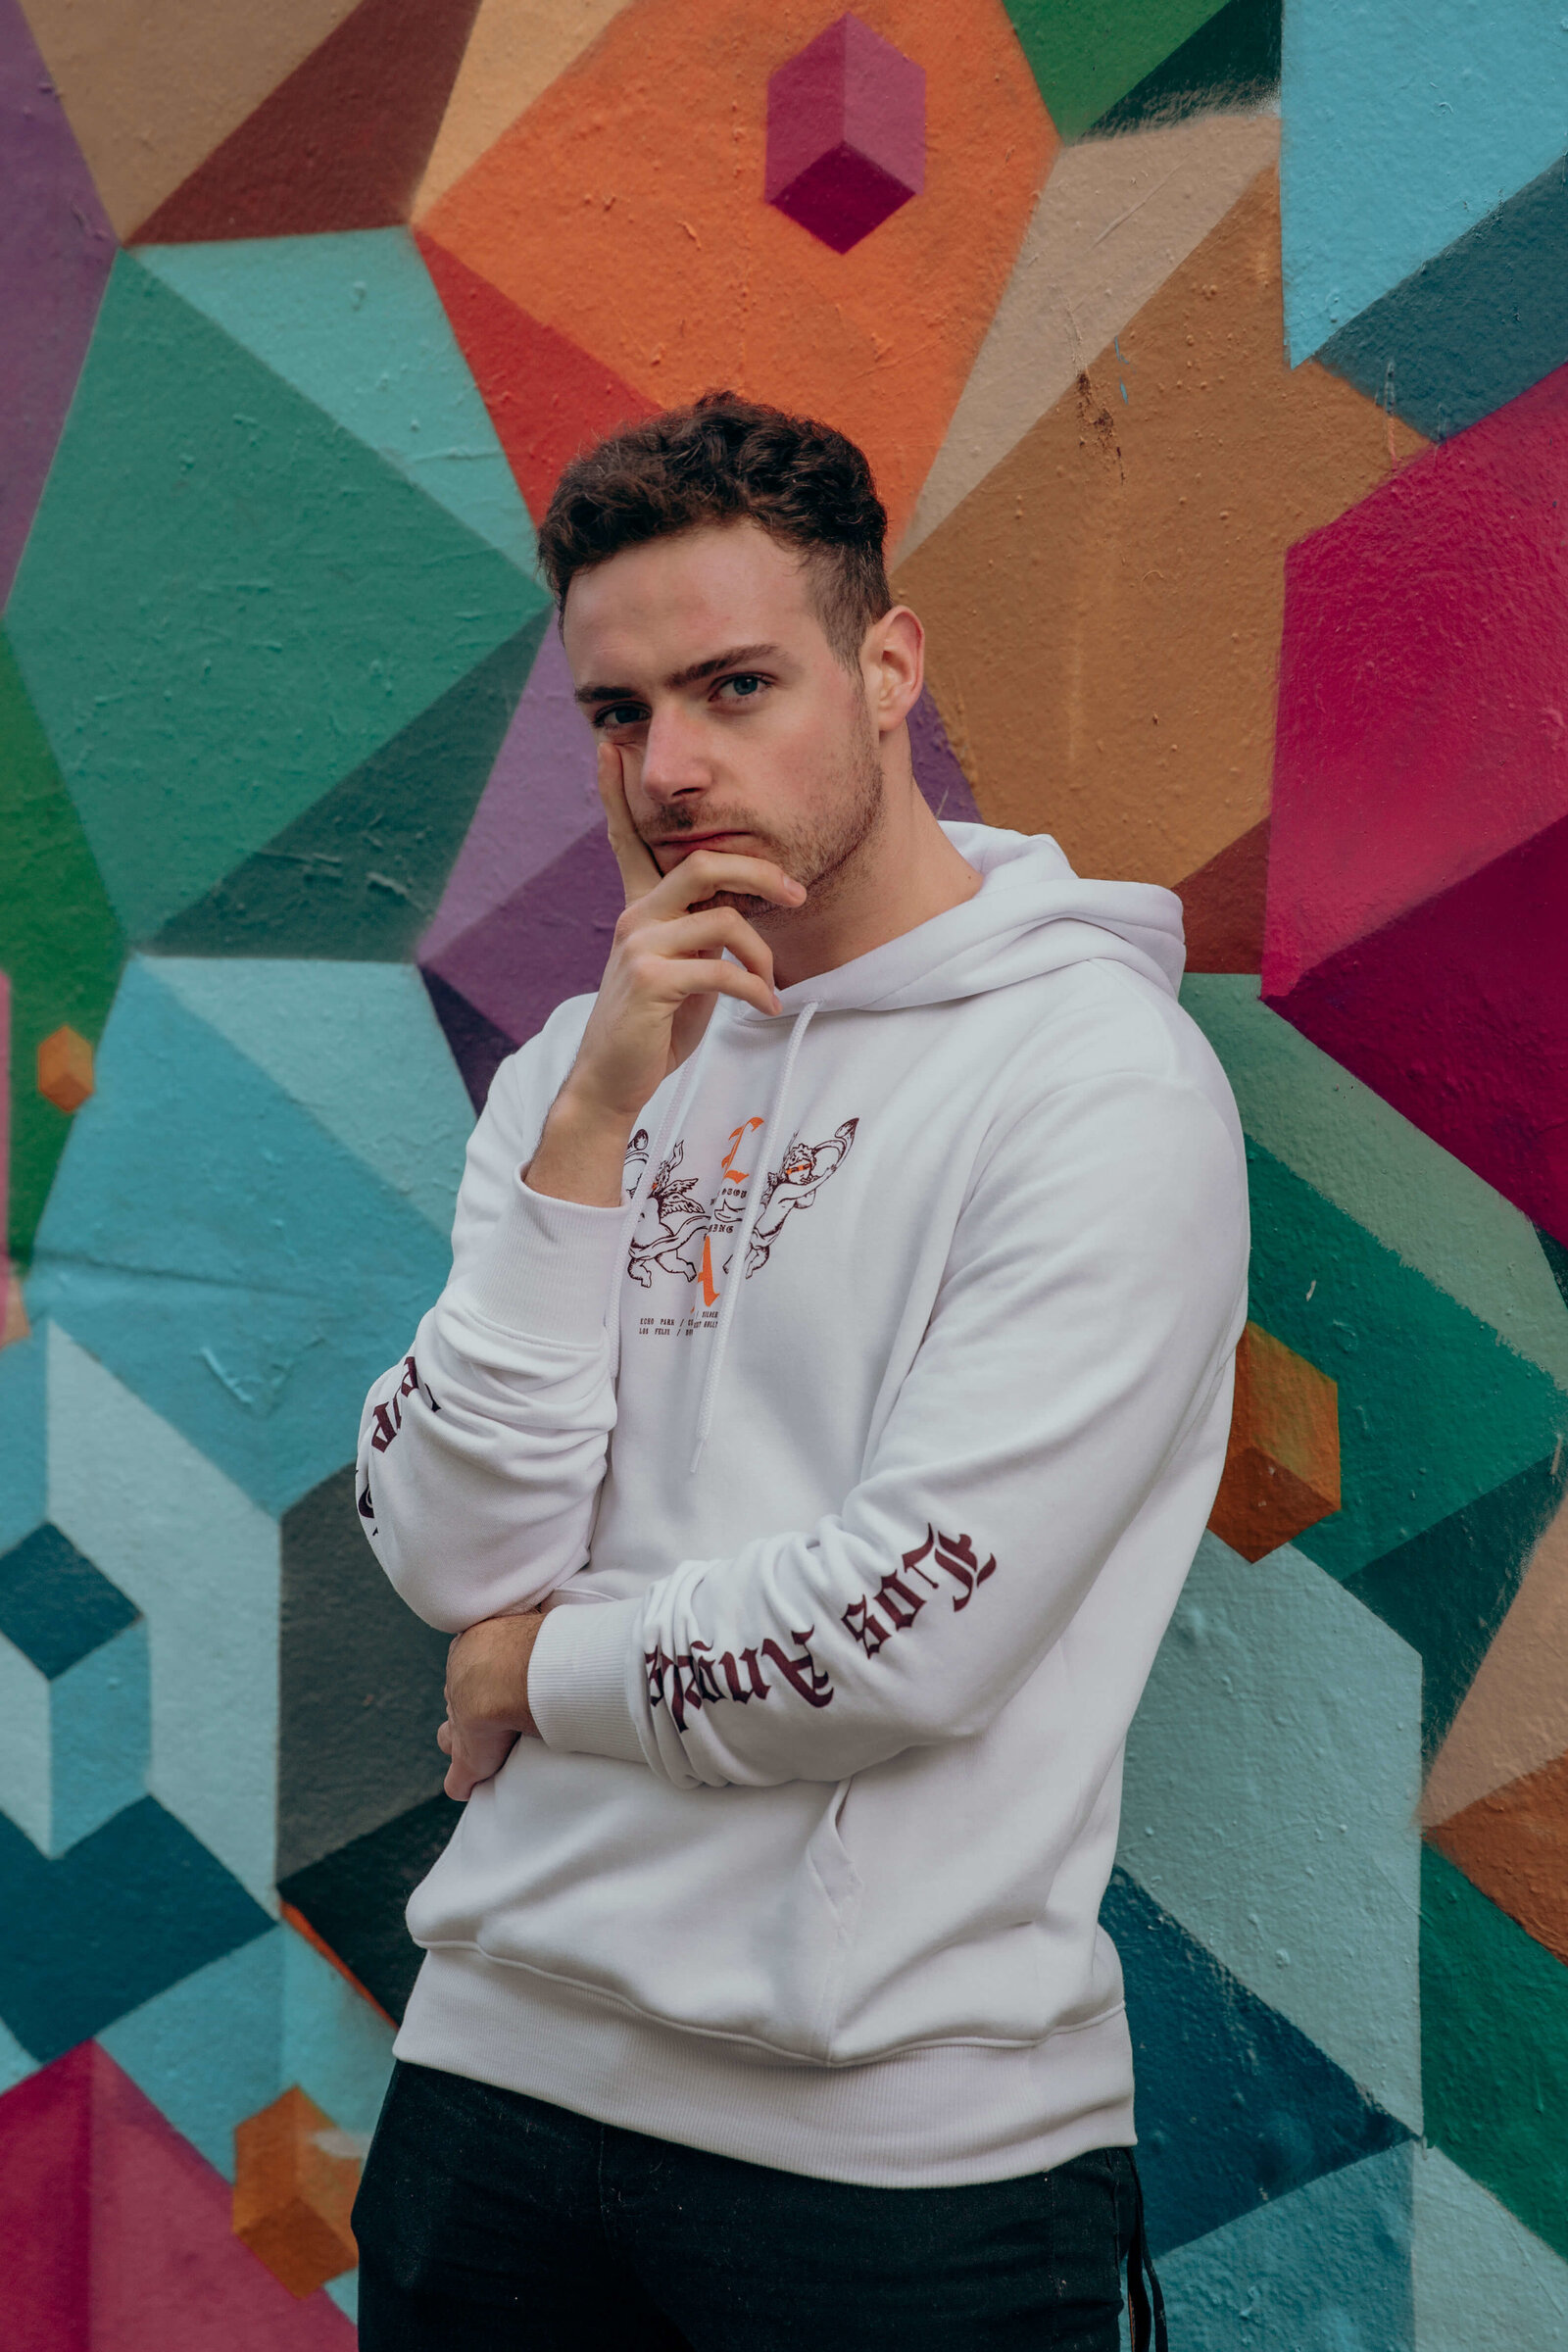 Connor stood leaning against a wall covered in colourful graffiti.